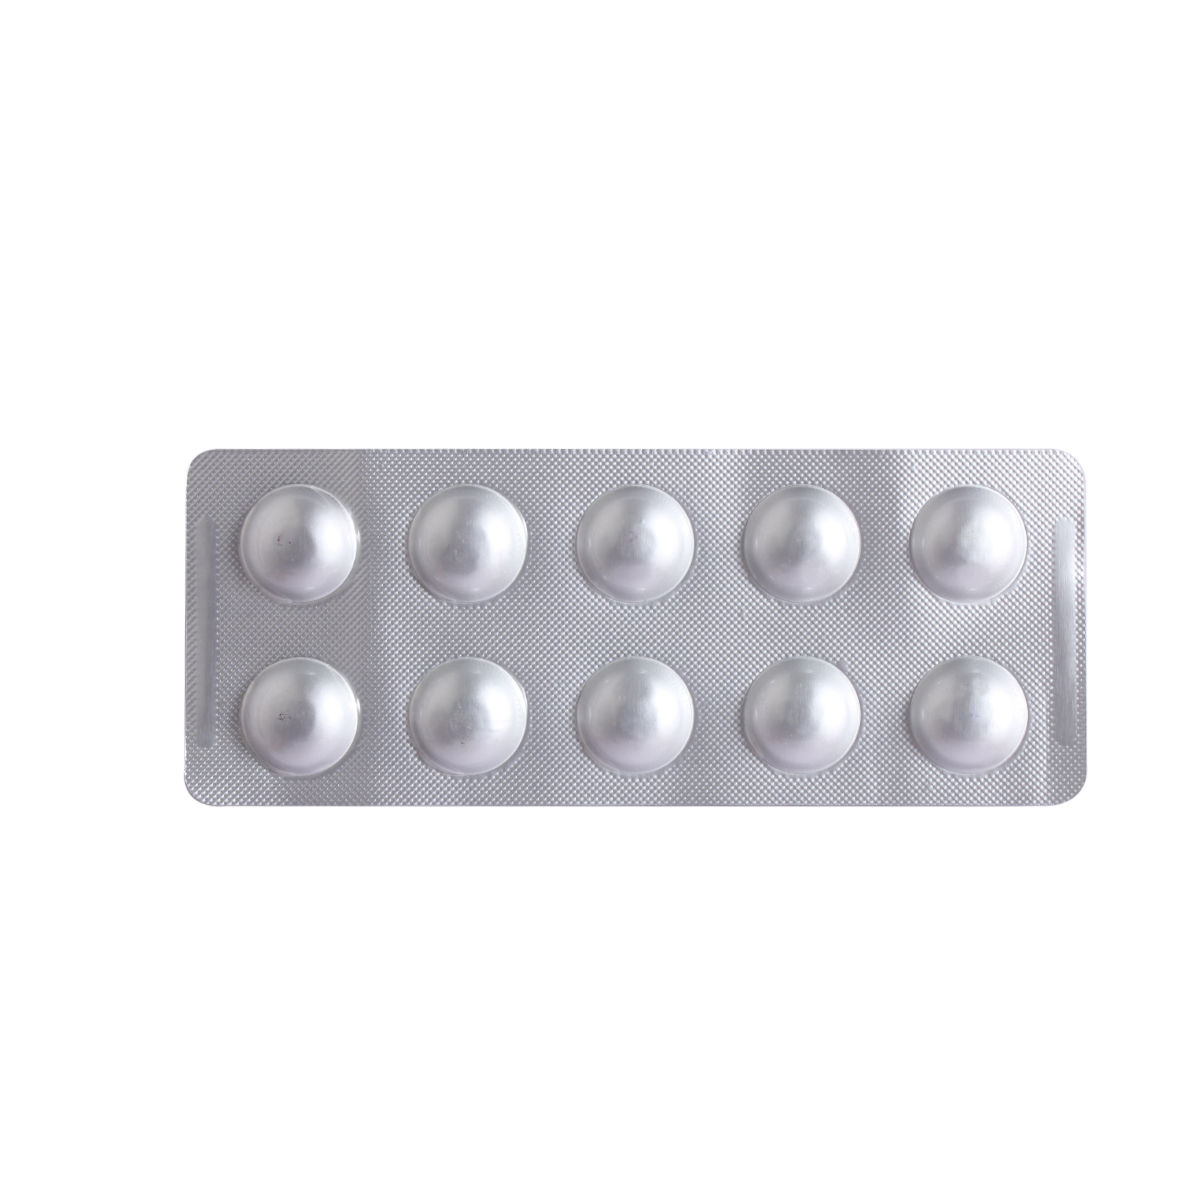 Febuday 80 Tablet 10's, Pack of 10 TabletS